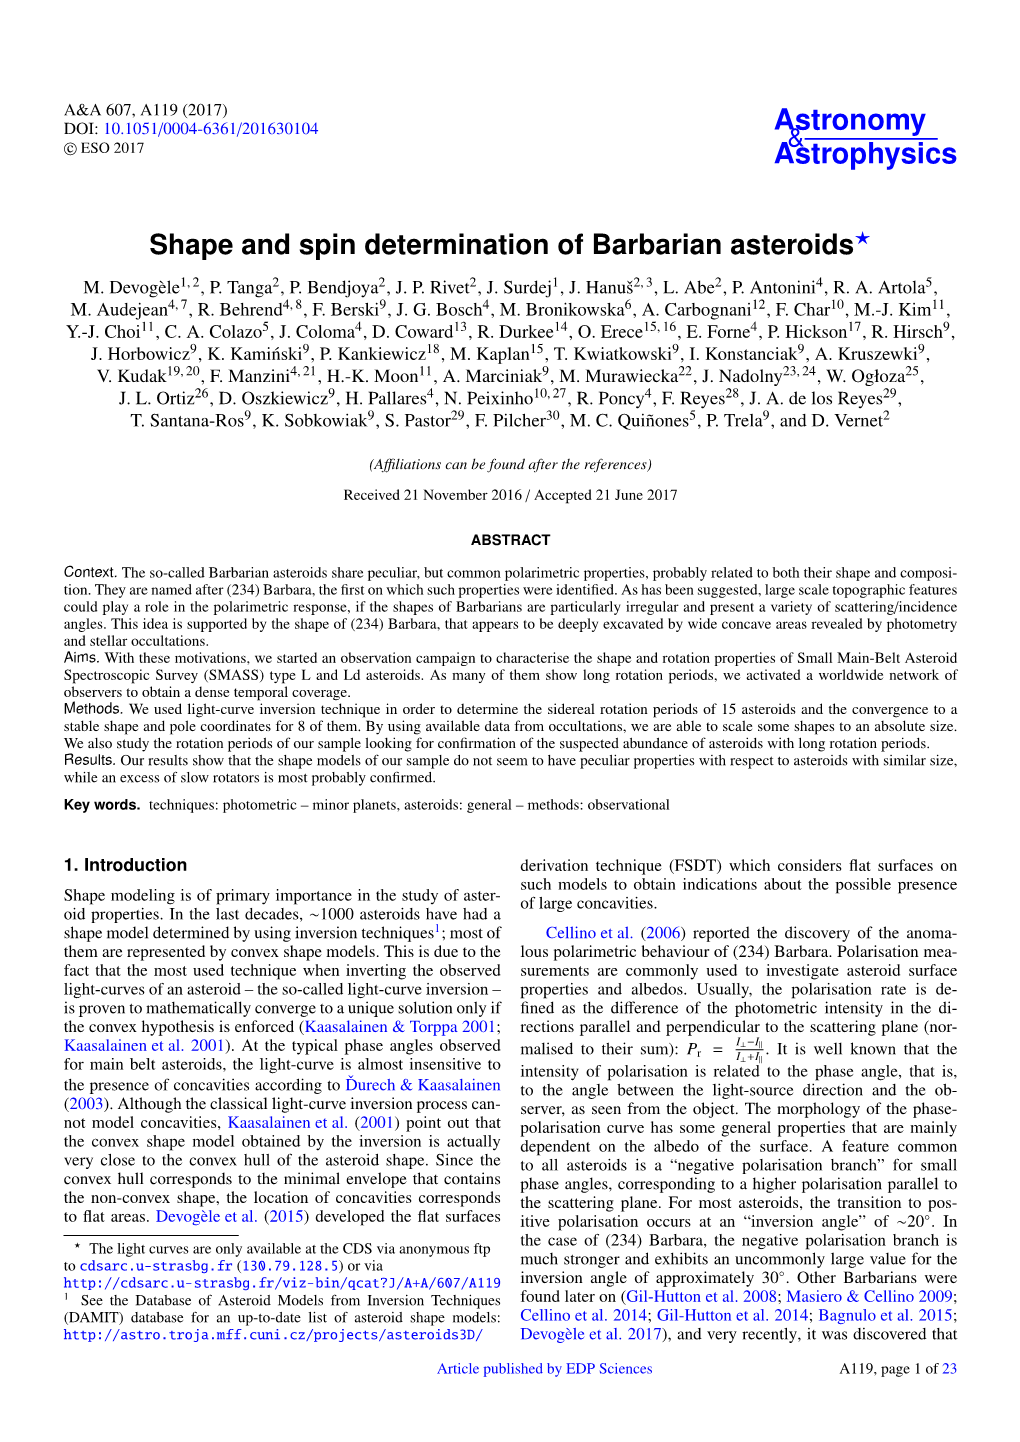 Shape and Spin Determination of Barbarian Asteroids? M